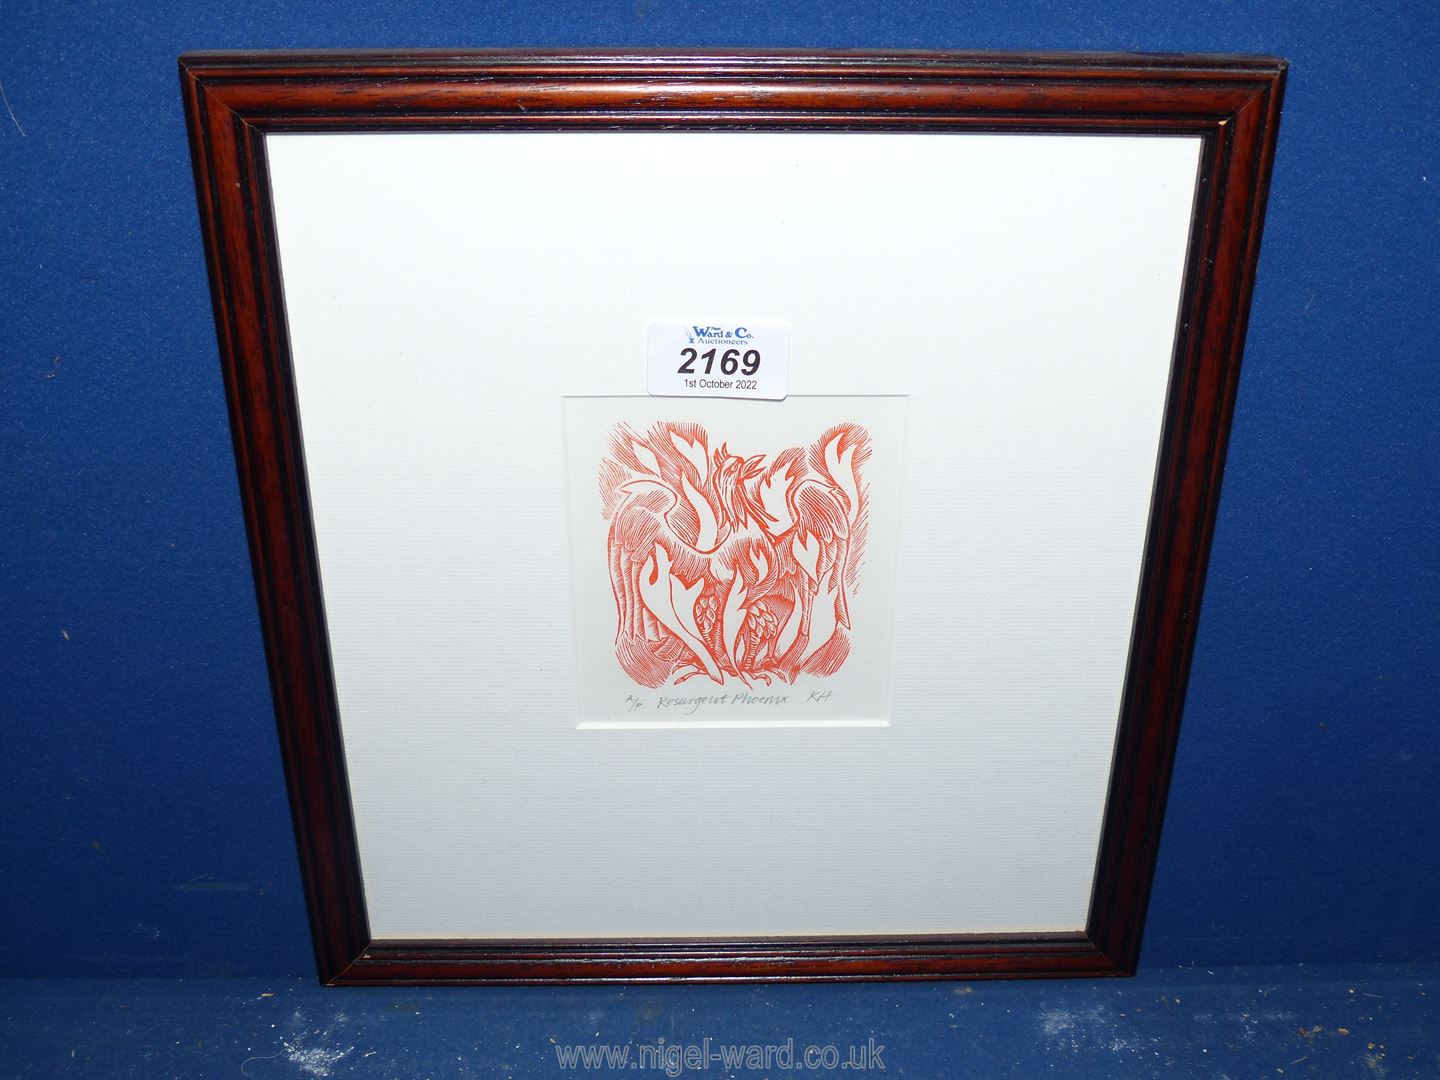 A framed and mounted artist proof plastic engraving titled 'Resurgent Phoenix' by Ken Hutchinson,